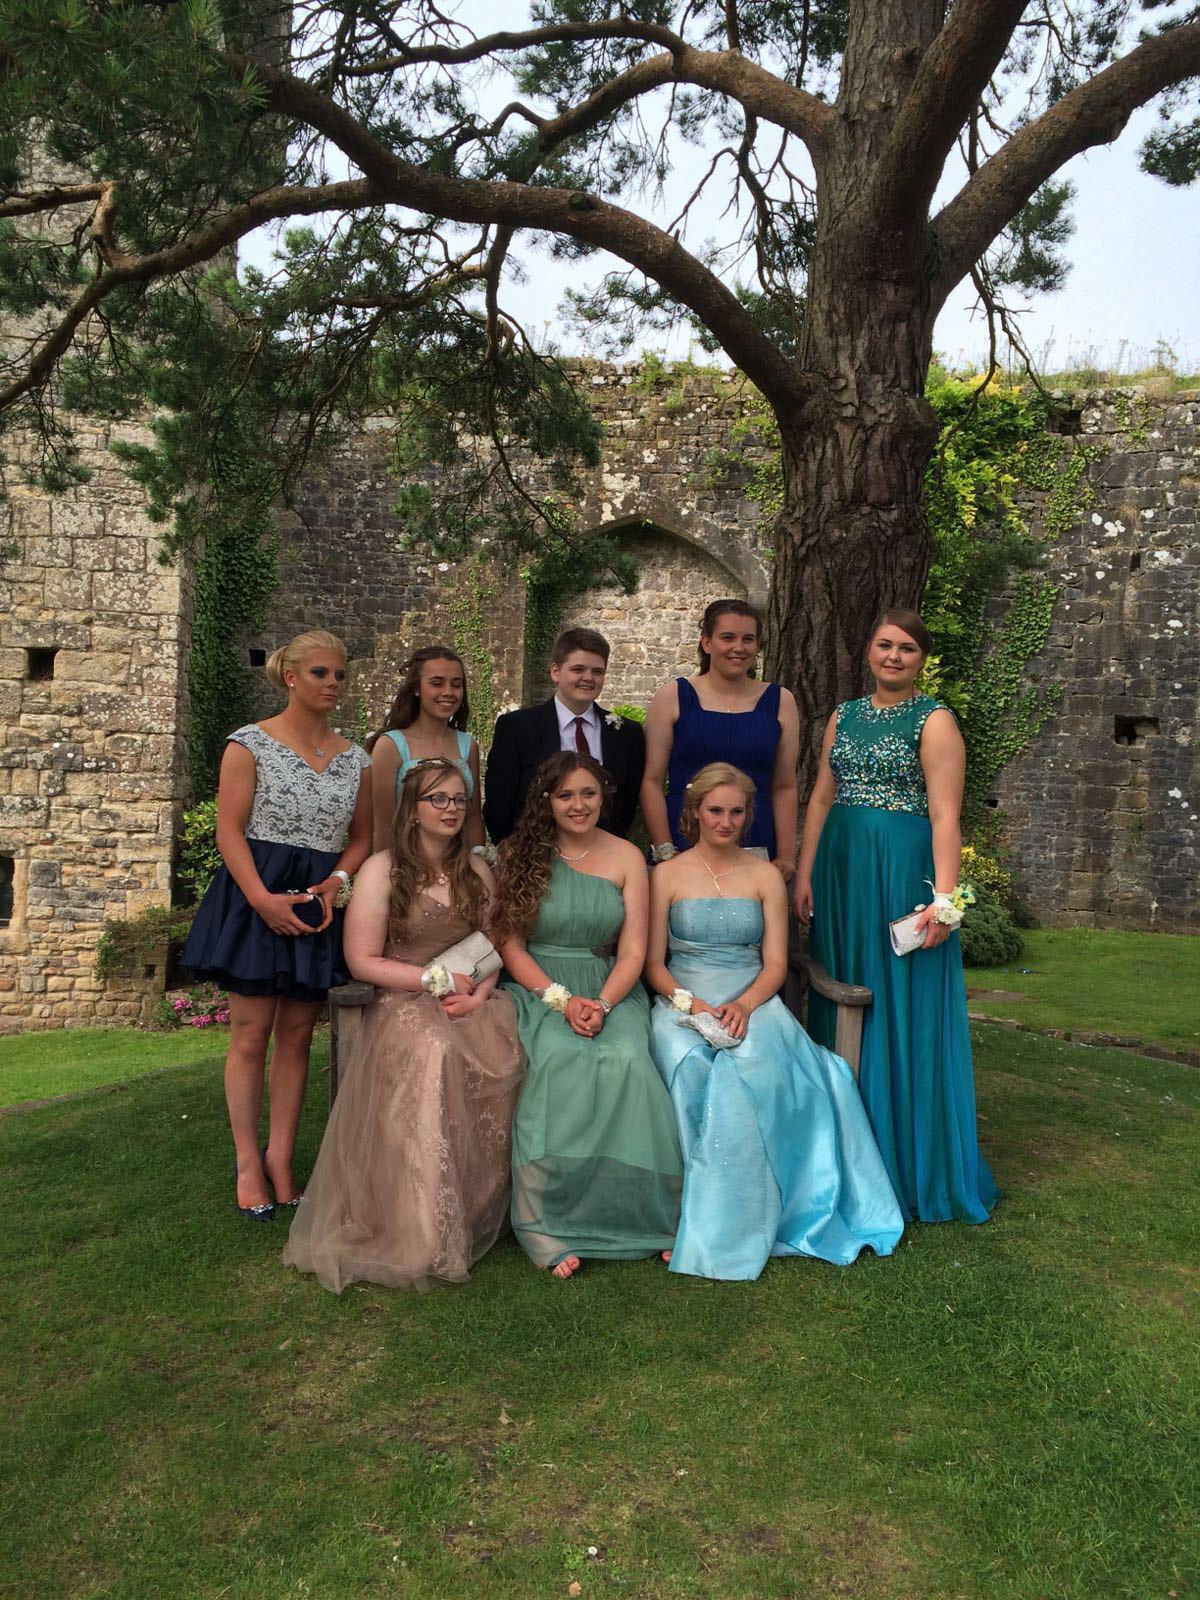 Caldicot: Caldicot castle was an ideal setting for prom photos